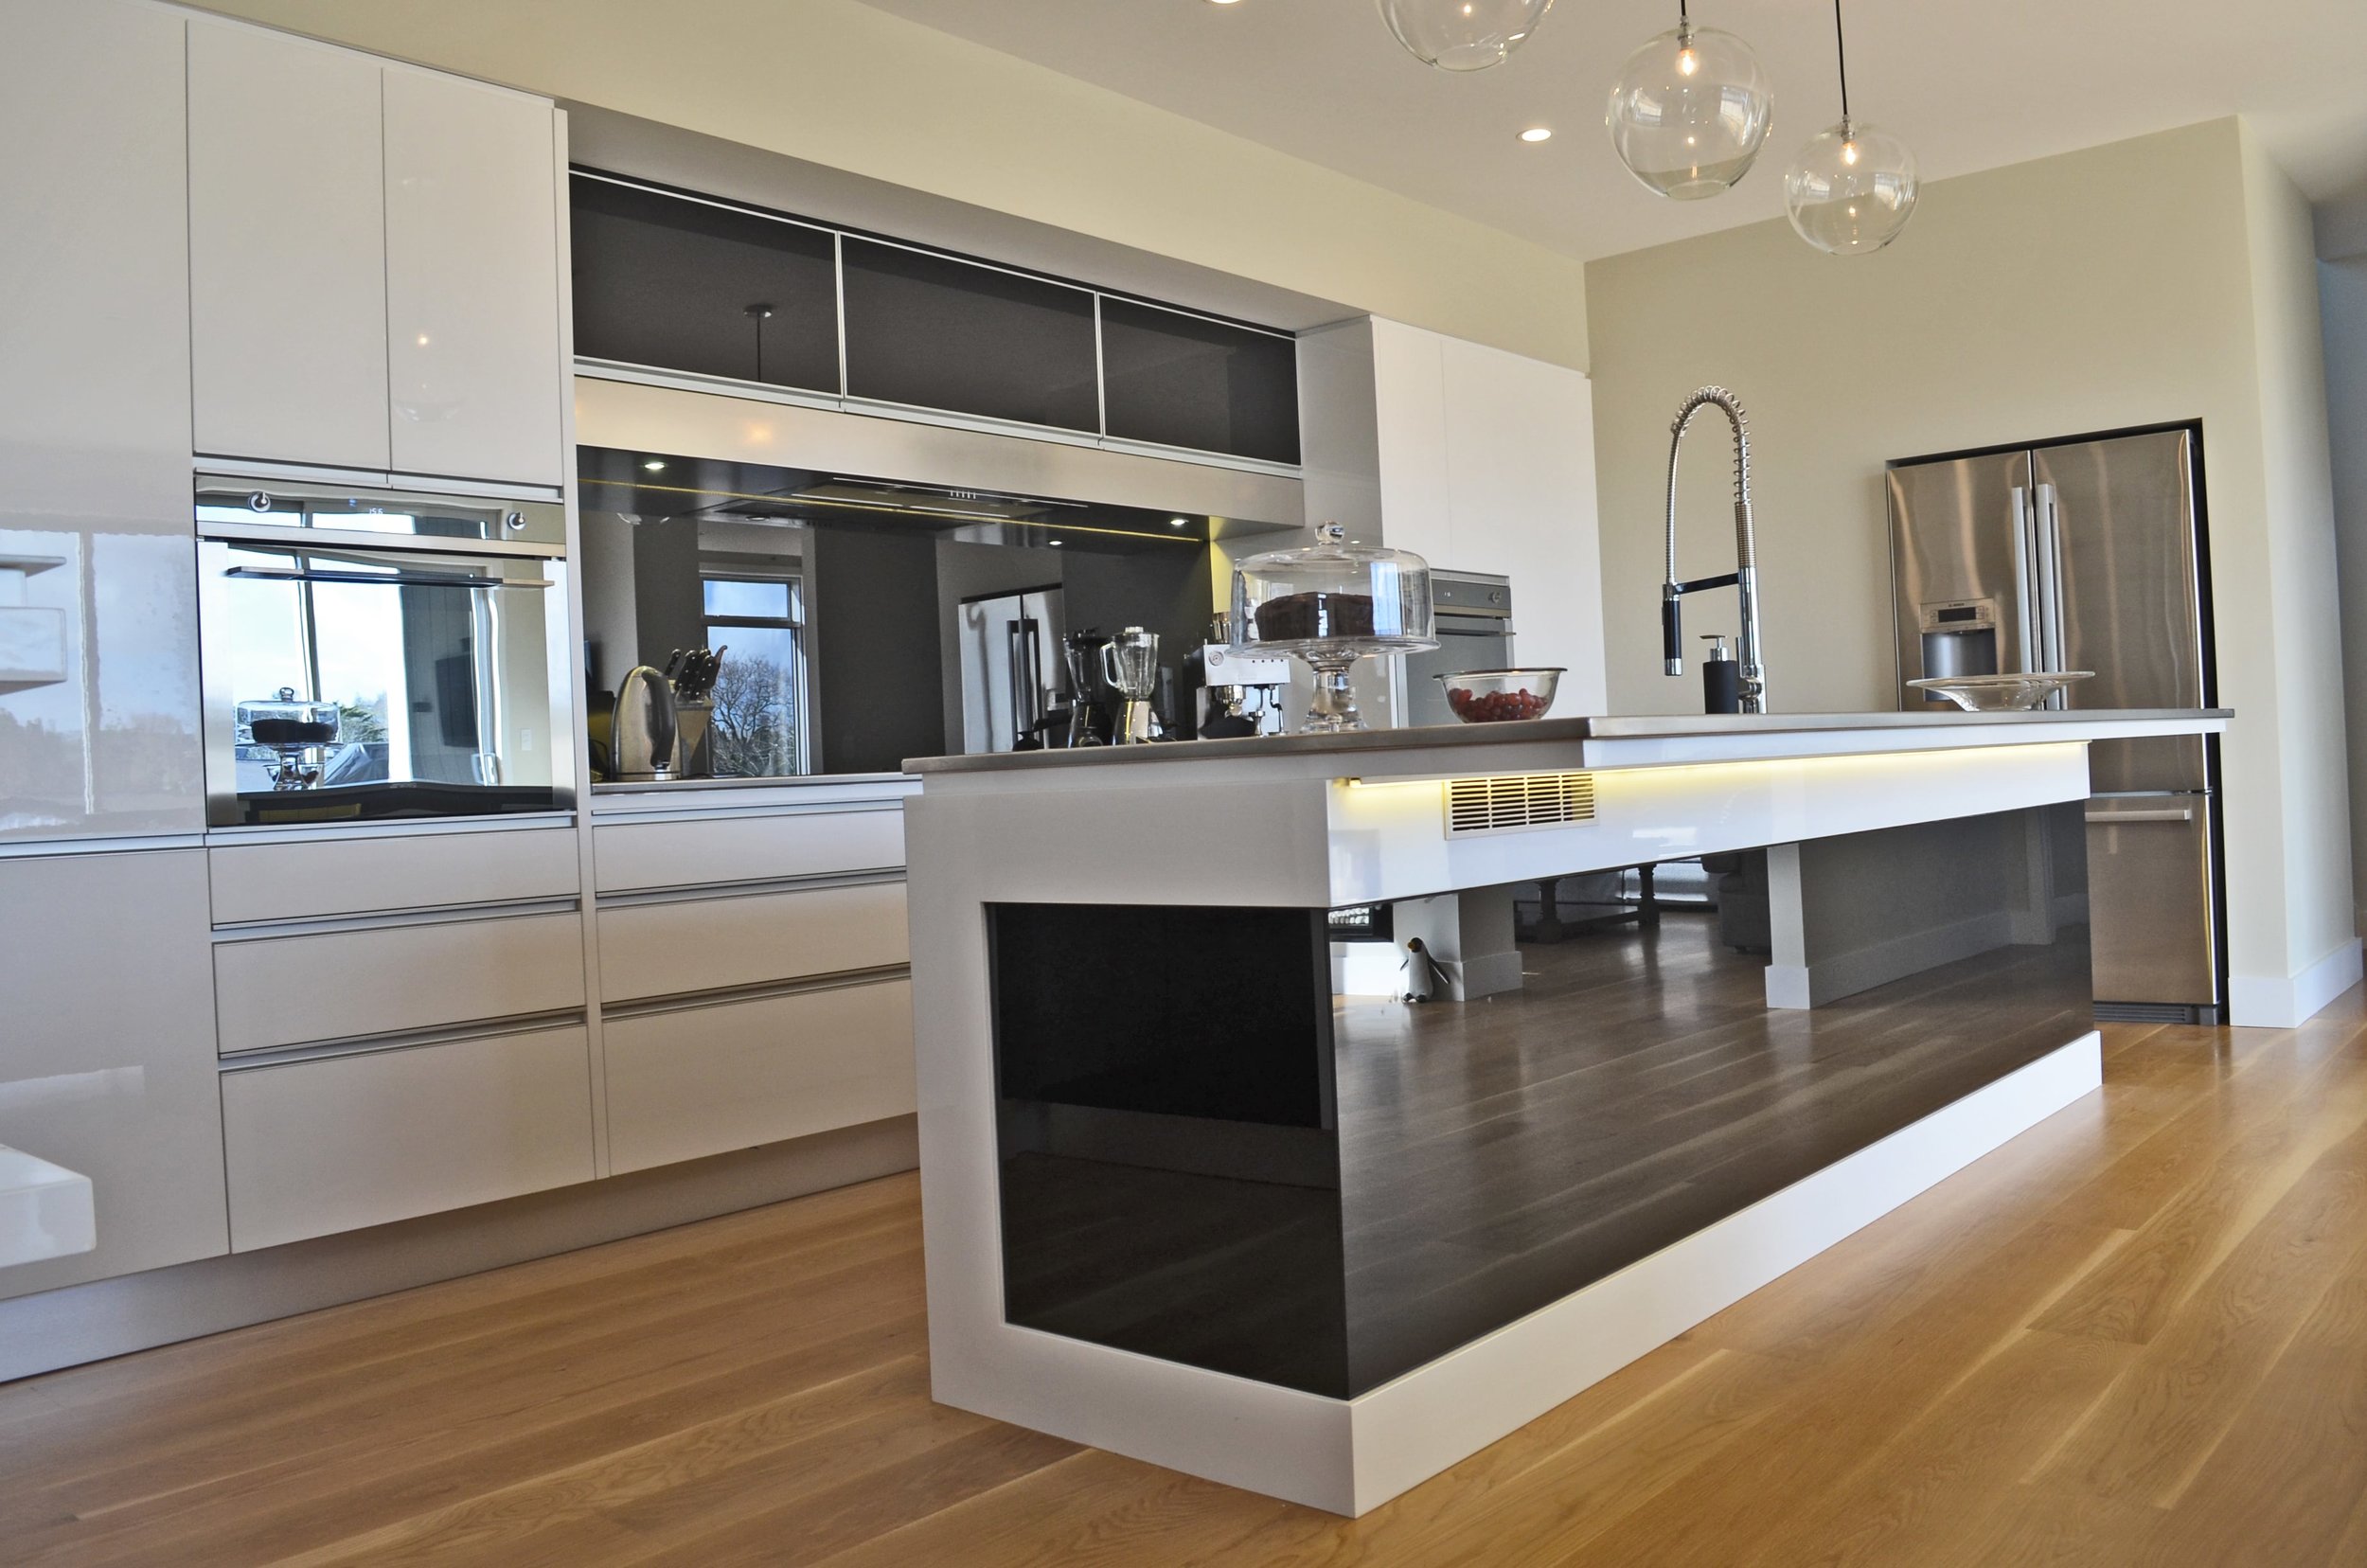 Galley kitchen with white cabinetry and black backpainted glass splashback and island back